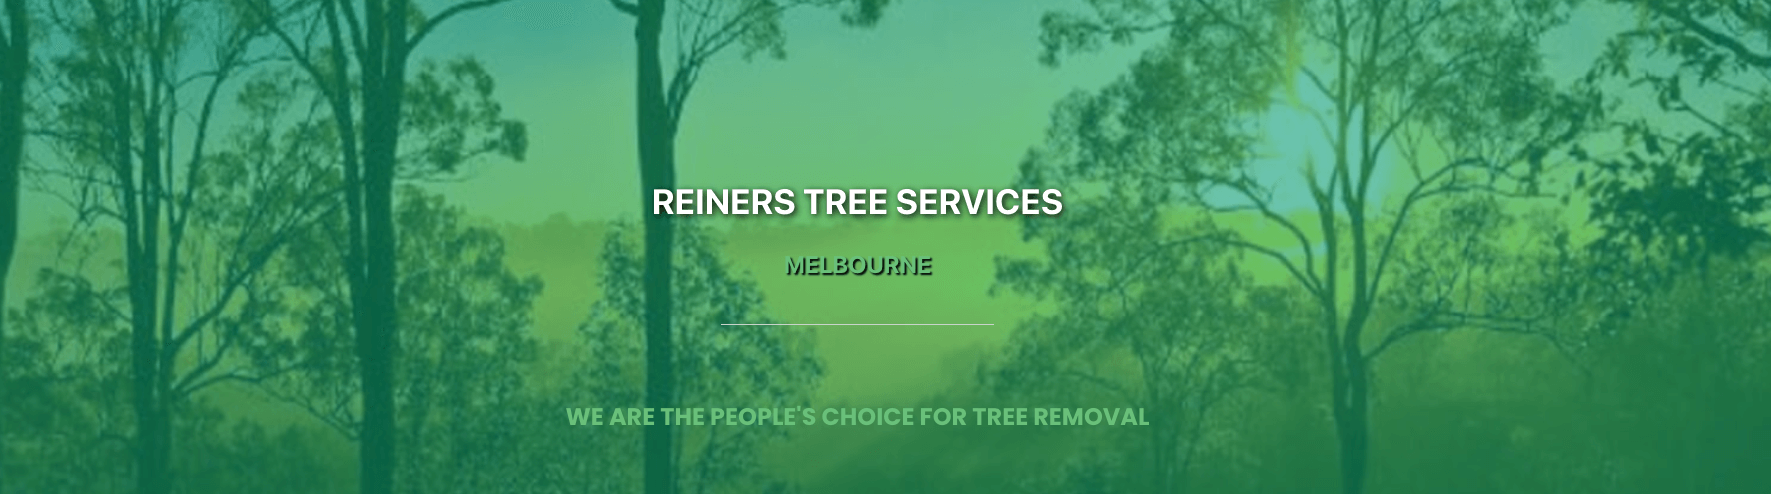 RTS, Reiners tree services banner